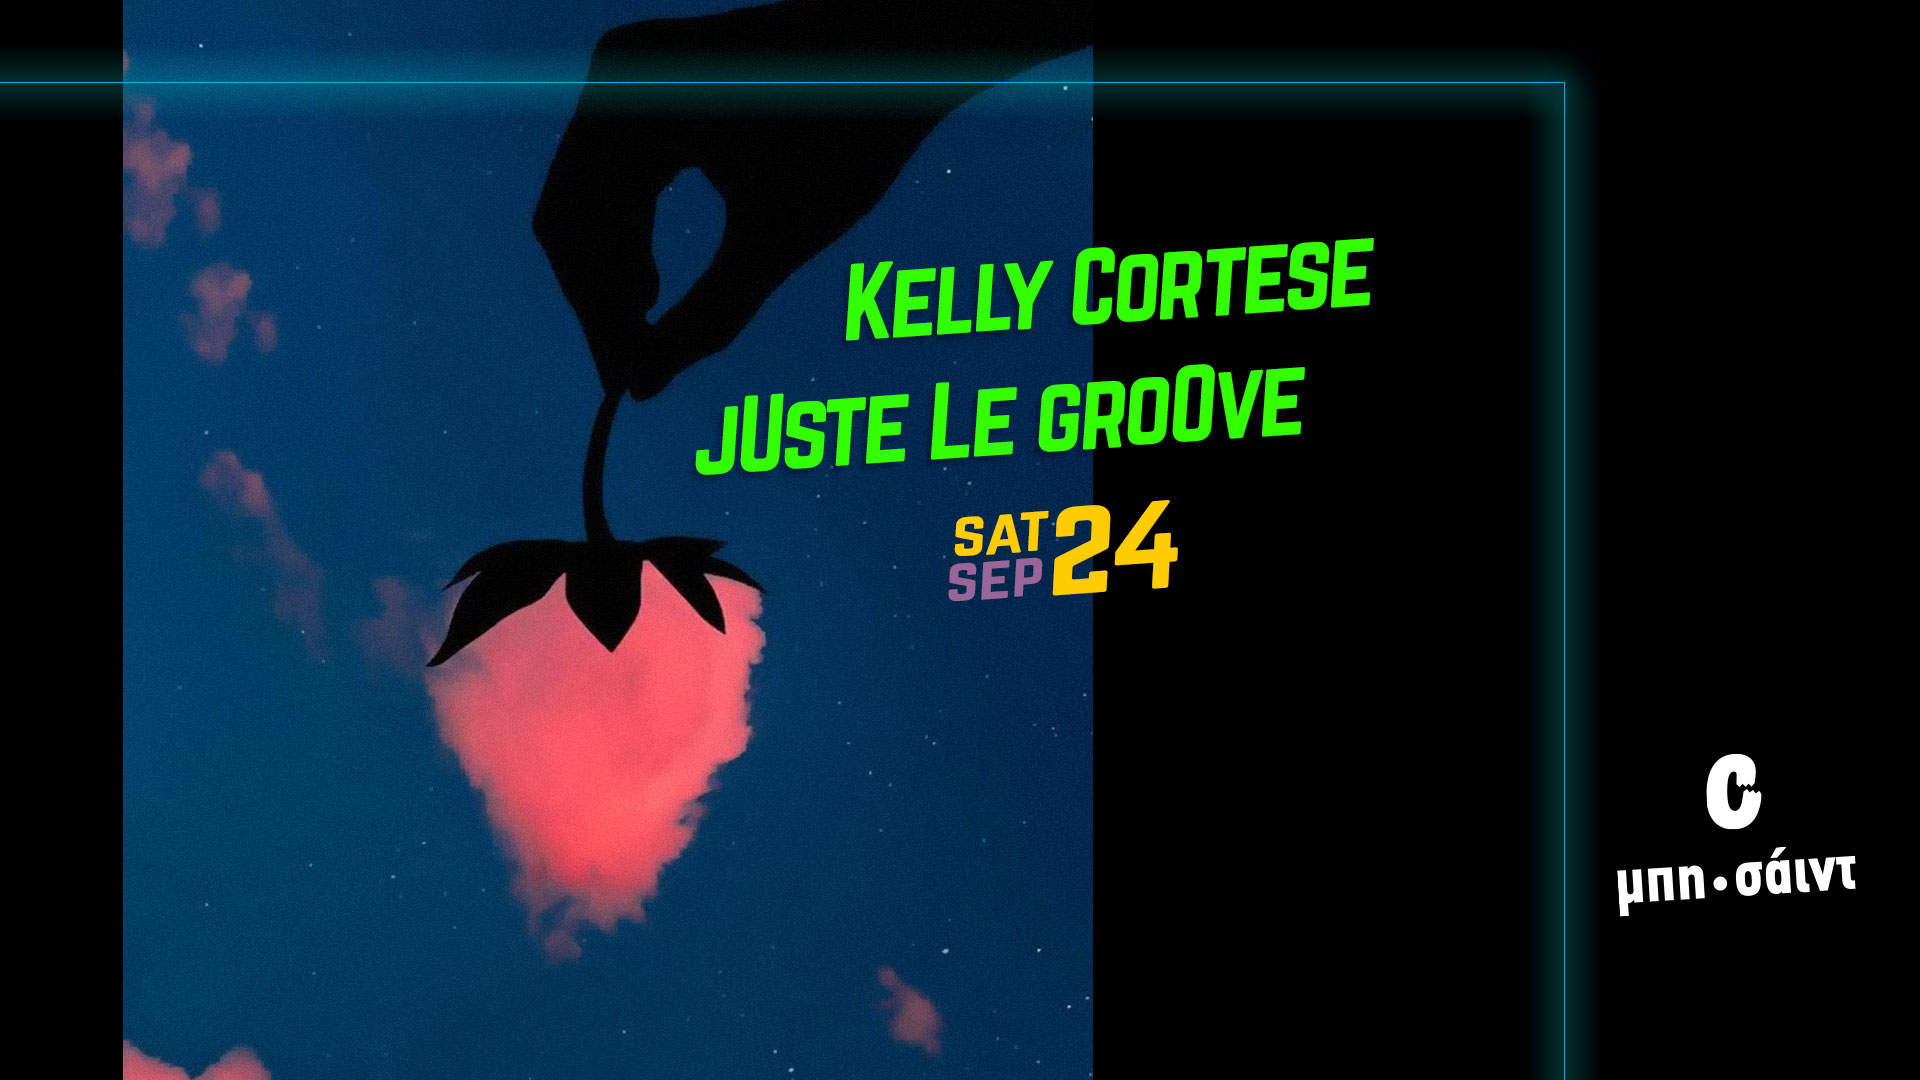 Le Groove